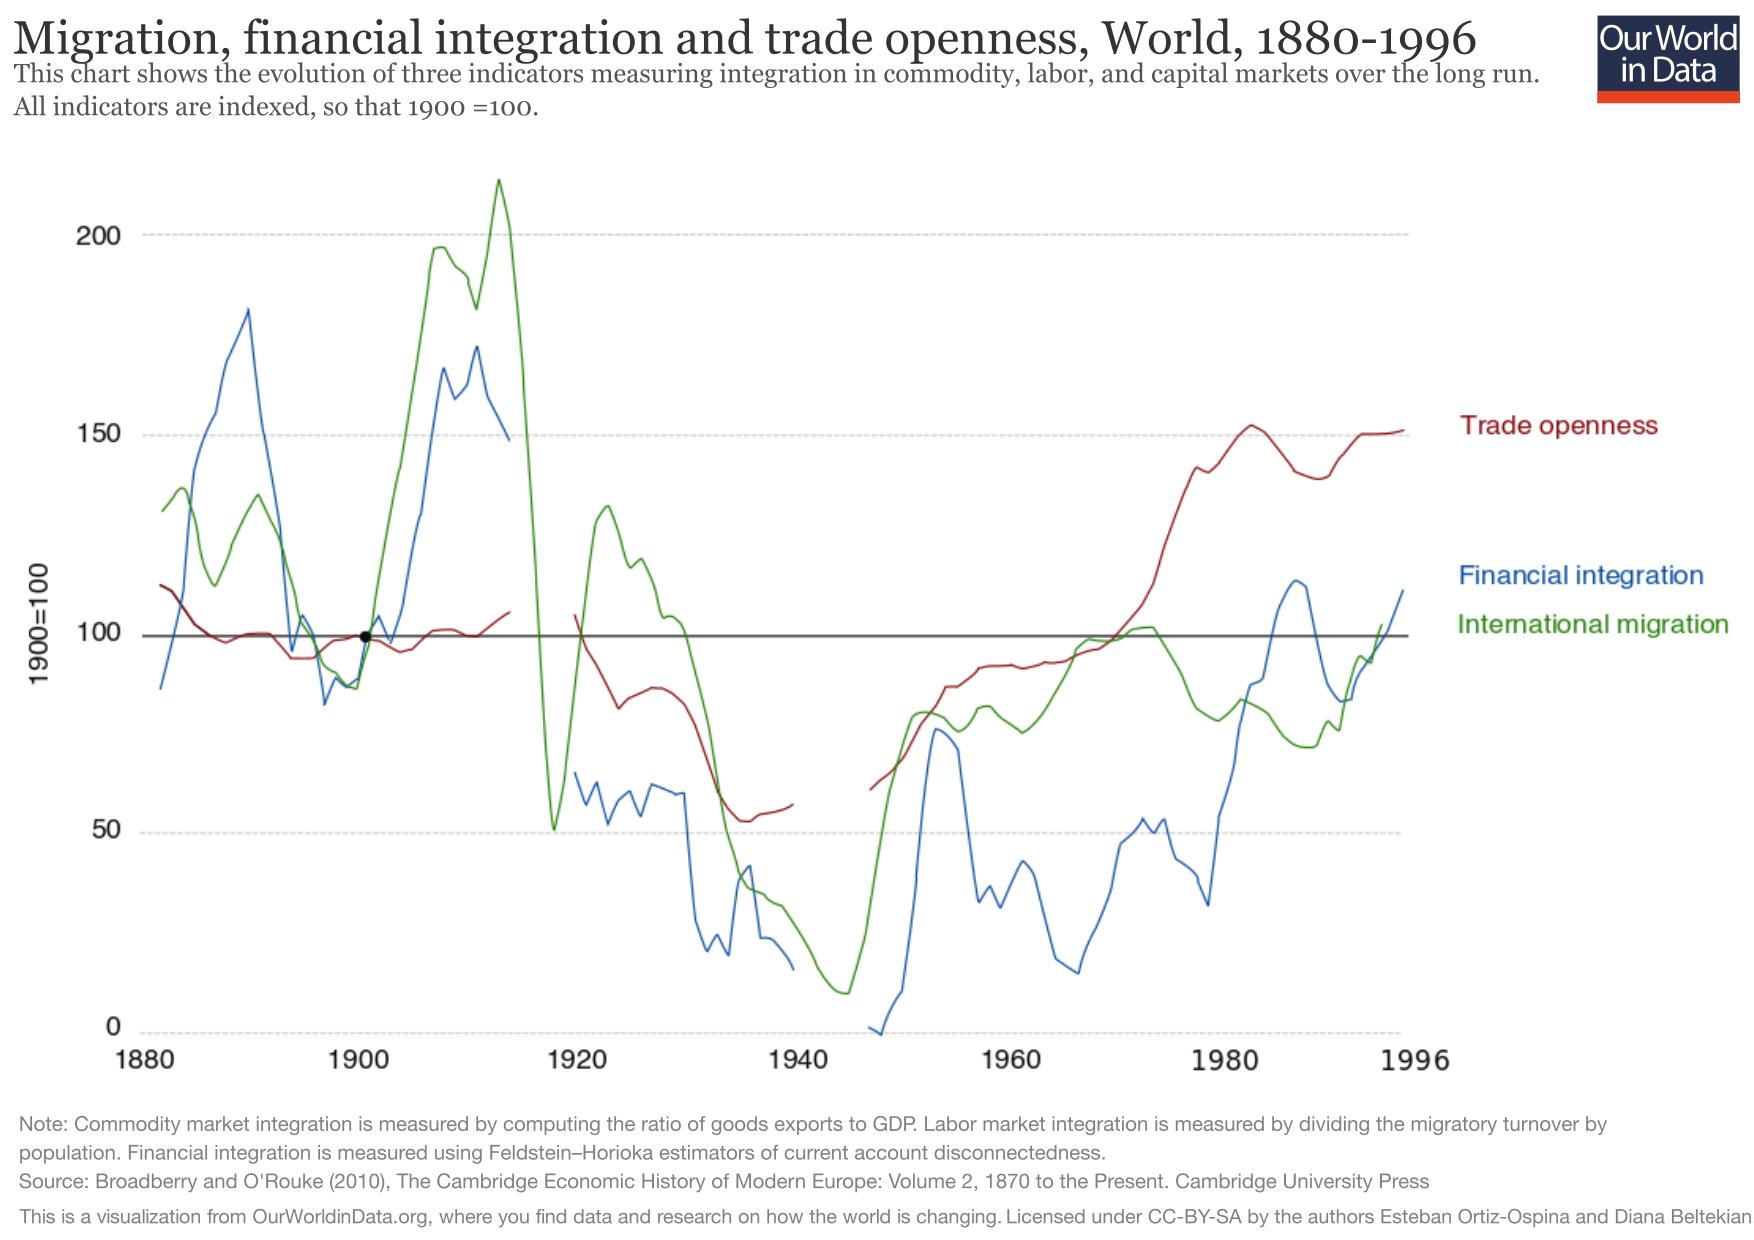 Migration, Financial integration, and Trade openness from 1880–1996